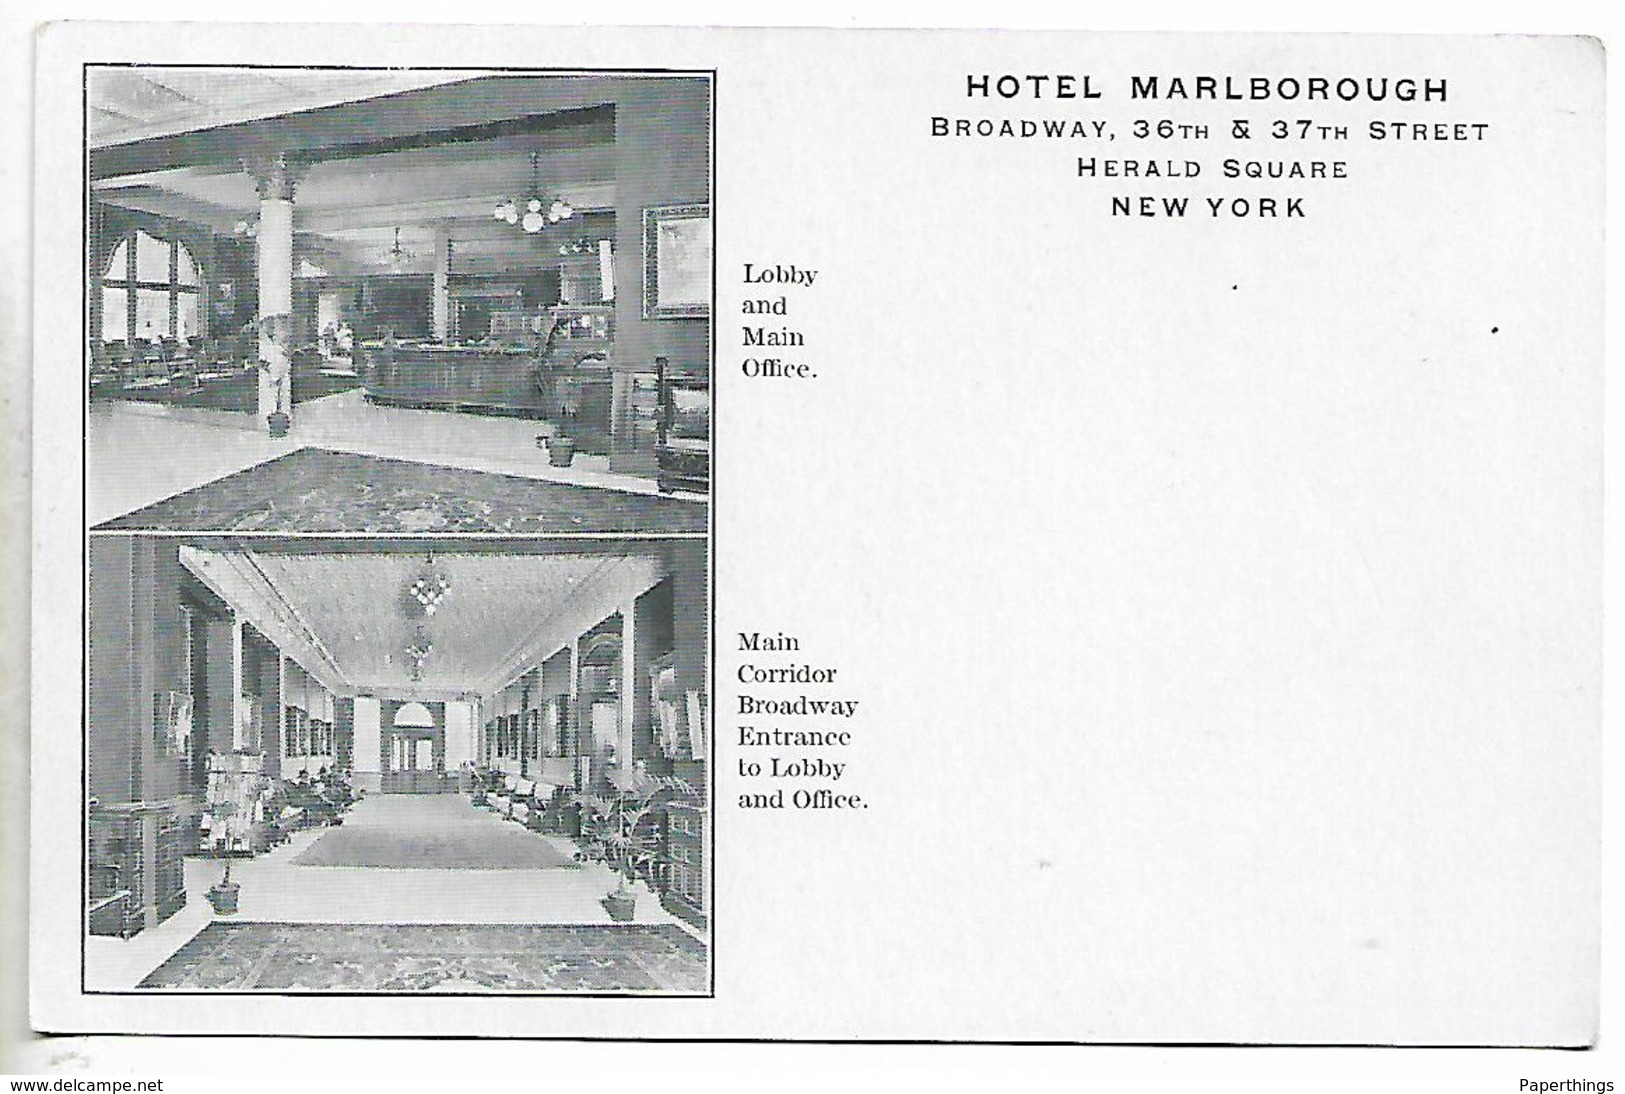 Early Postcard, New York, Hotel Marlborough, Broadway St, 36 And 37, Herald Square, Lobby And Office, Corridor. - Broadway